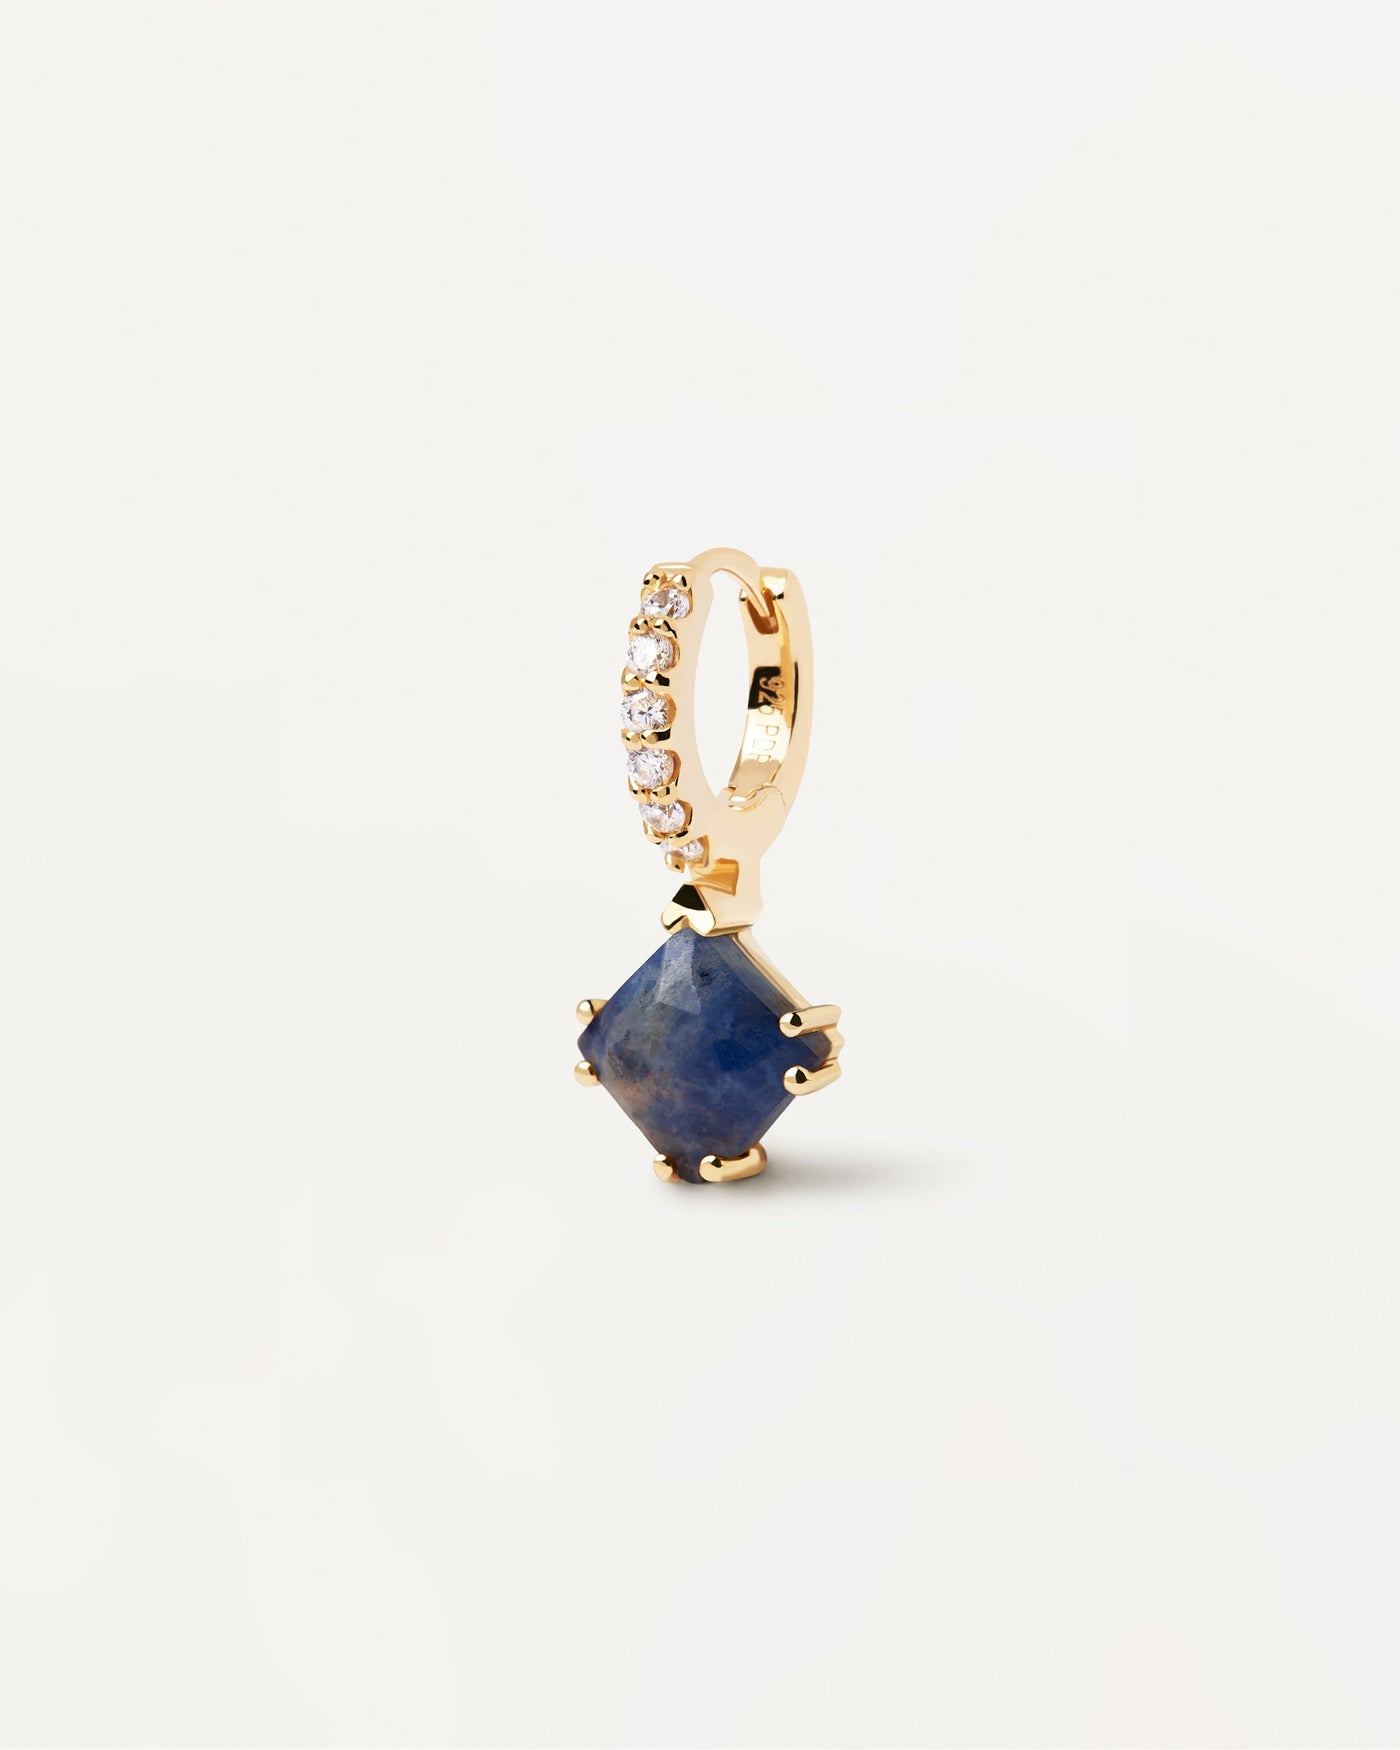 2023 Selection | Fuji Sodalite Single Earring. Gold-plated hoop ear piercing with white zirconia and dark blue squared gemstone pendant. Get the latest arrival from PDPAOLA. Place your order safely and get this Best Seller. Free Shipping.